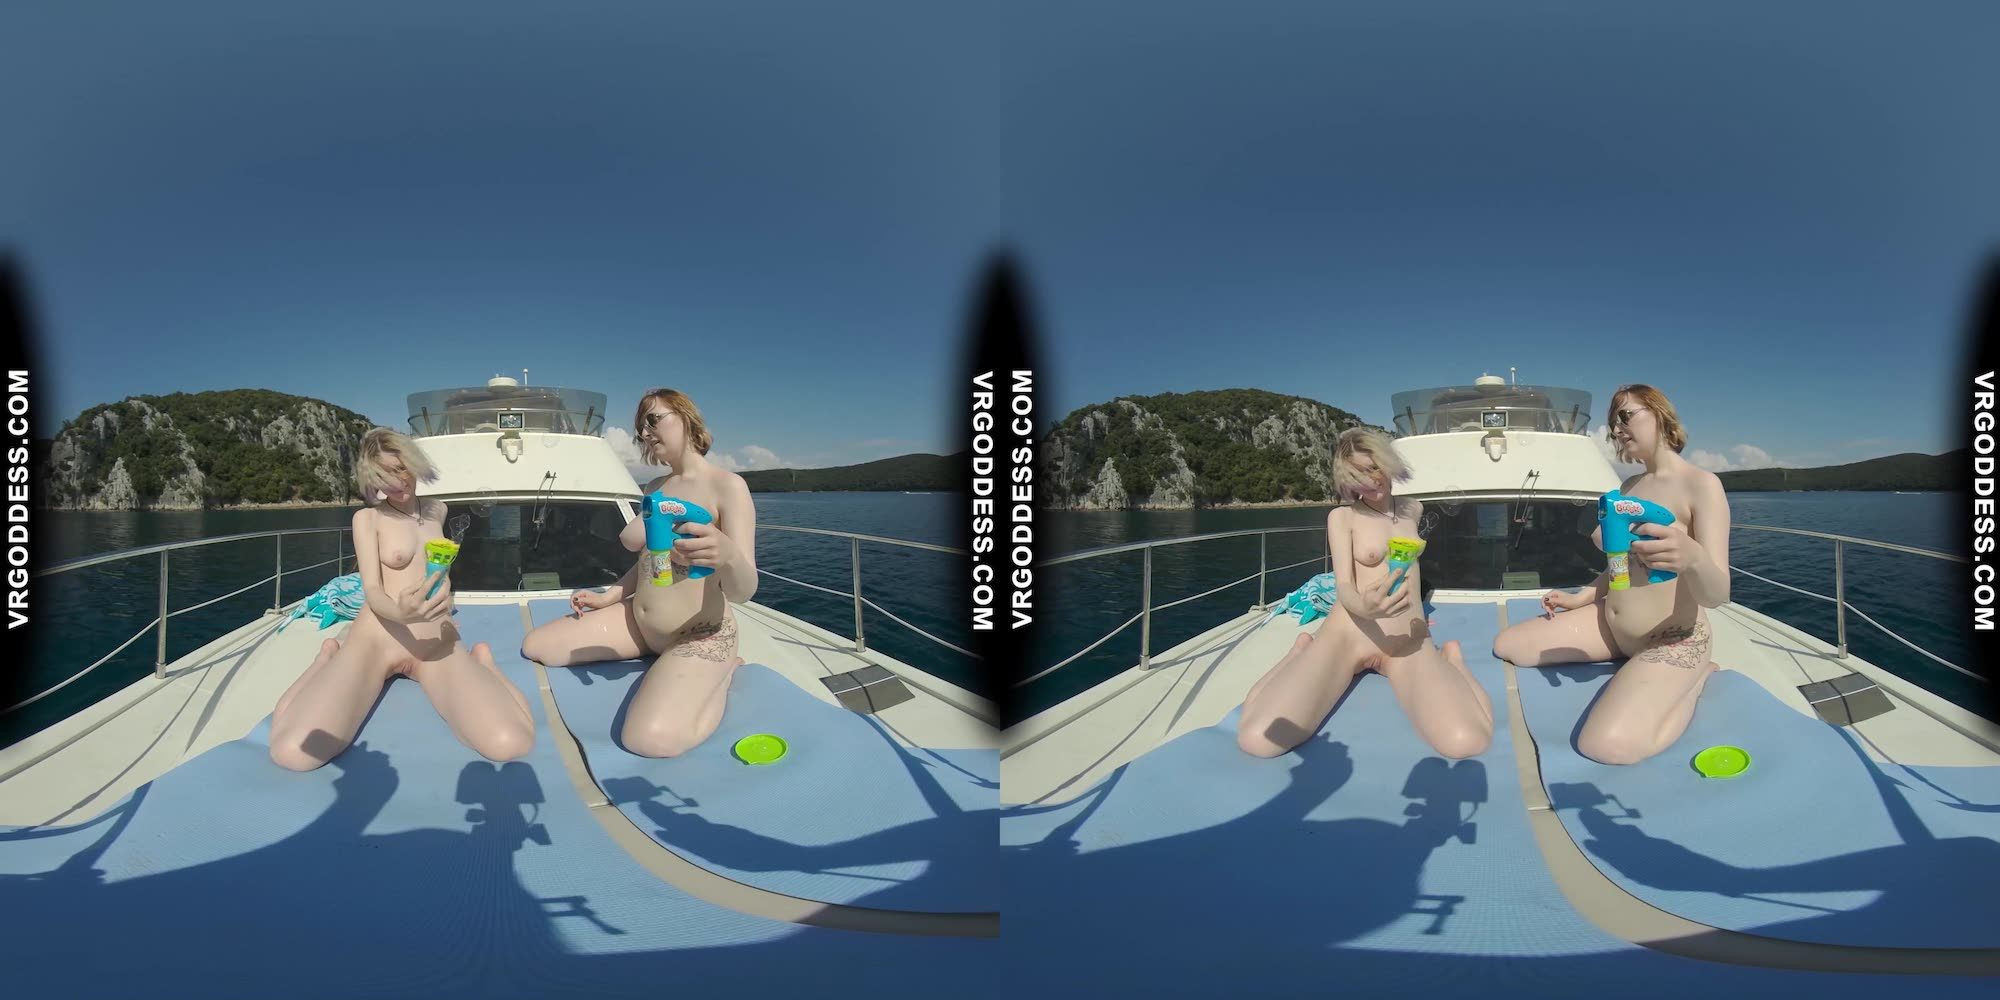 Ingrida And Diana Nude Sunbathing On A Yacht Vacation Playing With Bubbles Slideshow